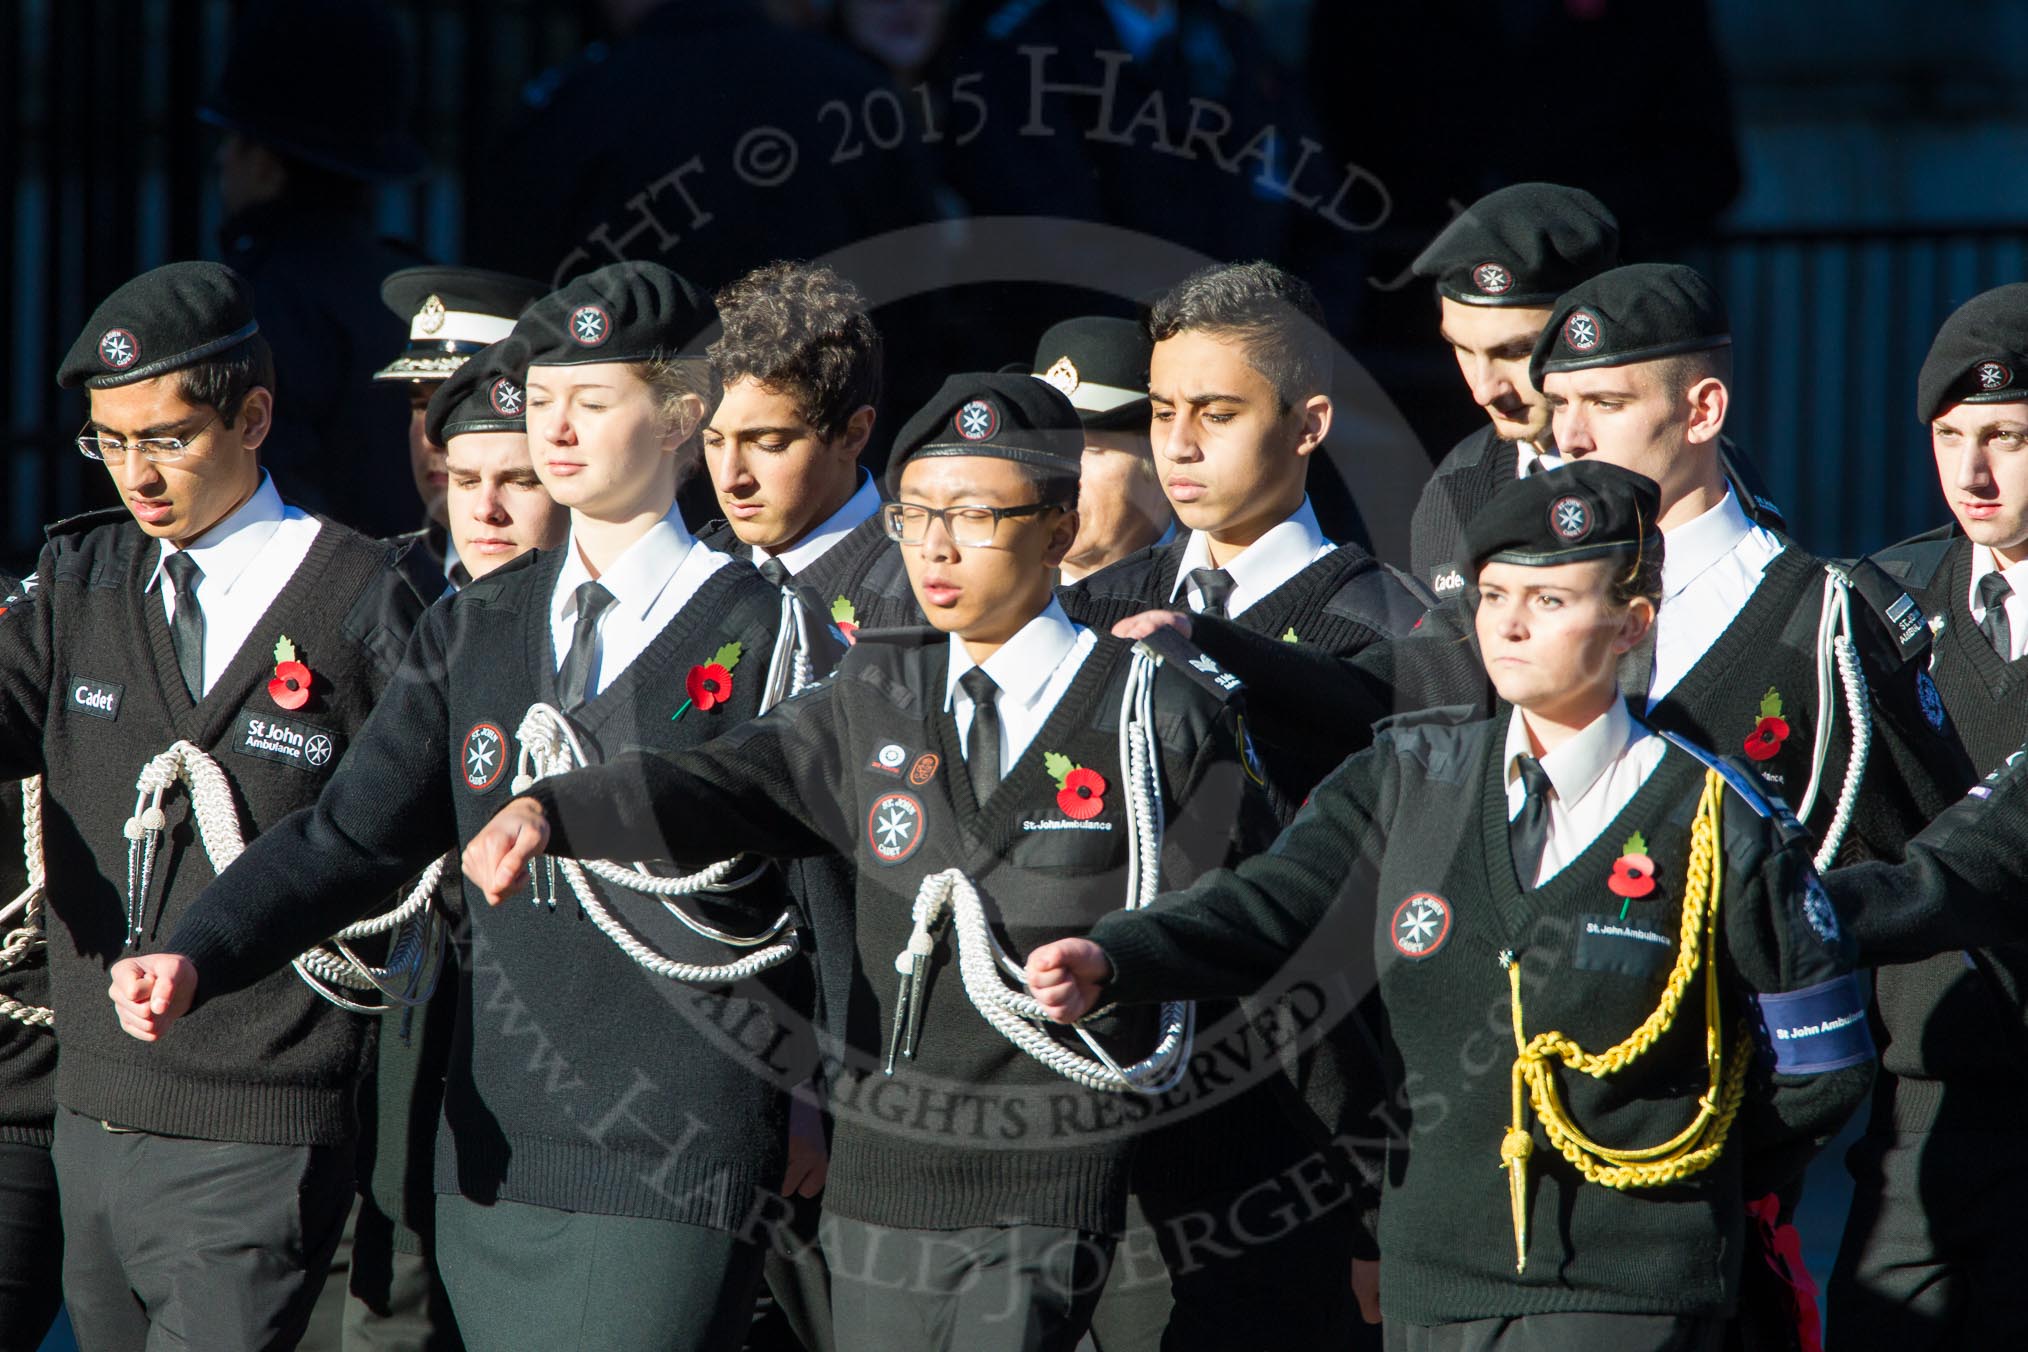 Remembrance Sunday Cenotaph March Past 2013: M55 - St John Ambulance Cadets..
Press stand opposite the Foreign Office building, Whitehall, London SW1,
London,
Greater London,
United Kingdom,
on 10 November 2013 at 12:16, image #2317